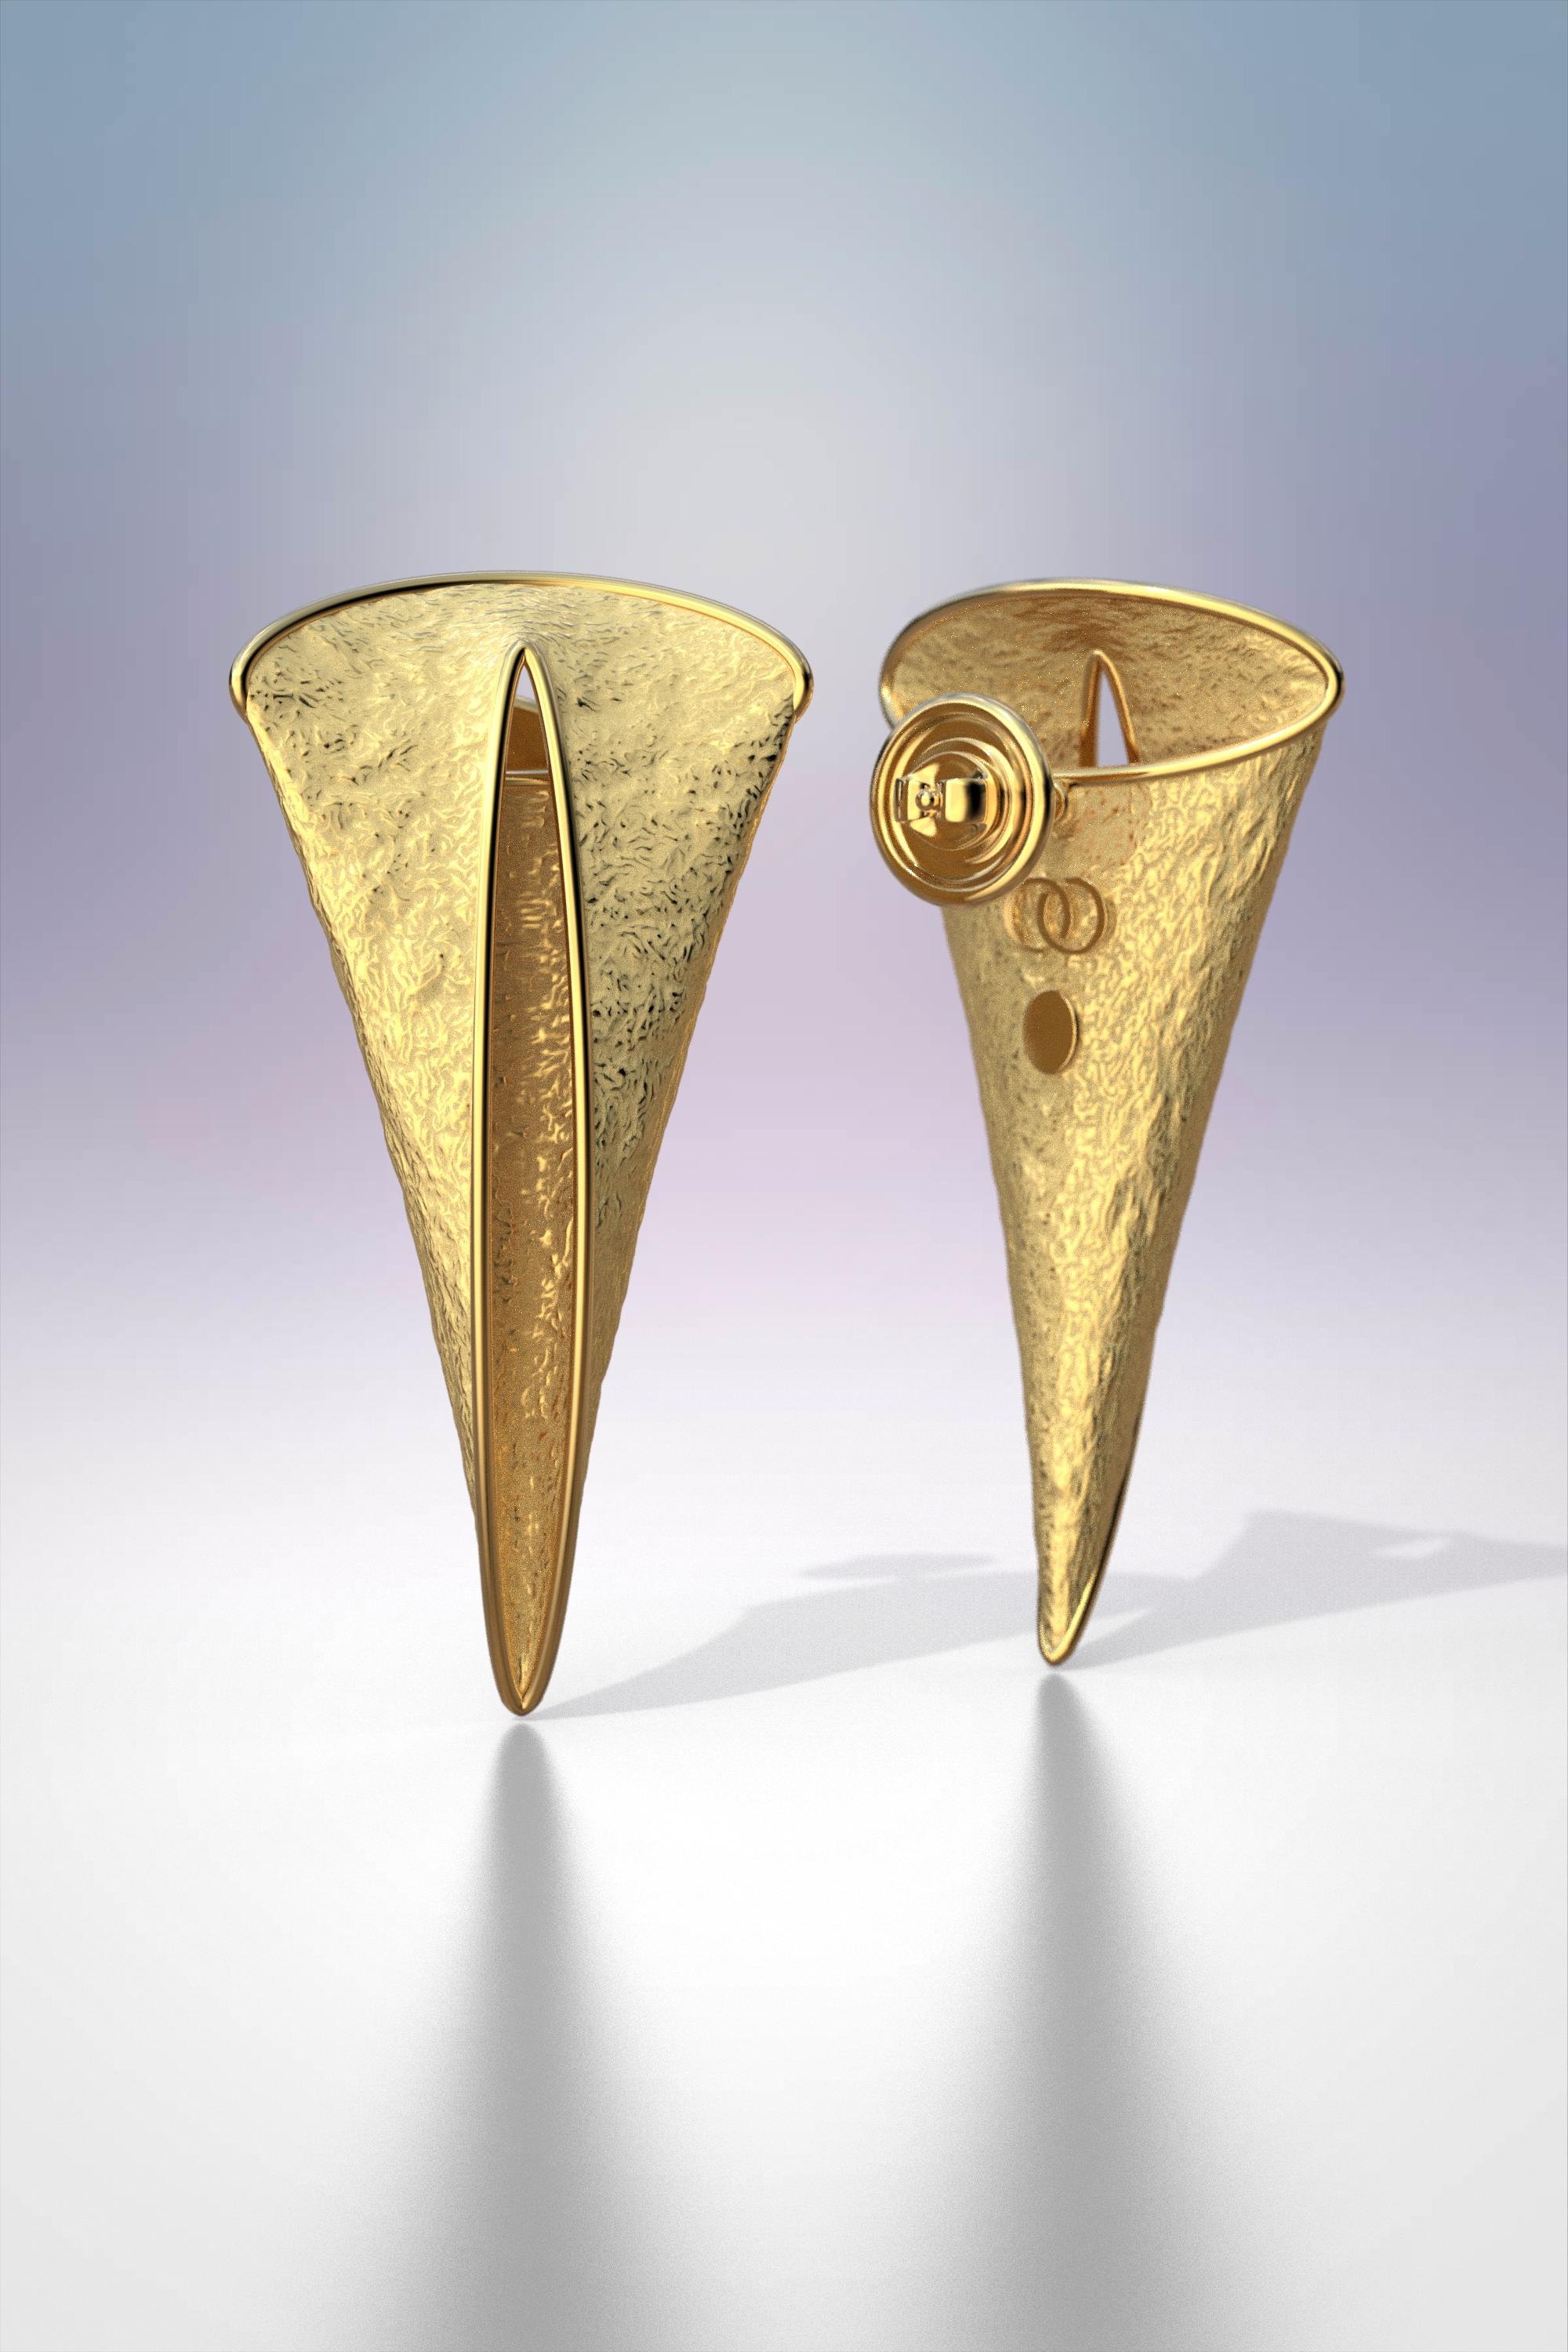 Contemporary Bold 14k Gold Earrings Handmade in Italy by Oltremare Gioielli, Thorn Shaped. For Sale